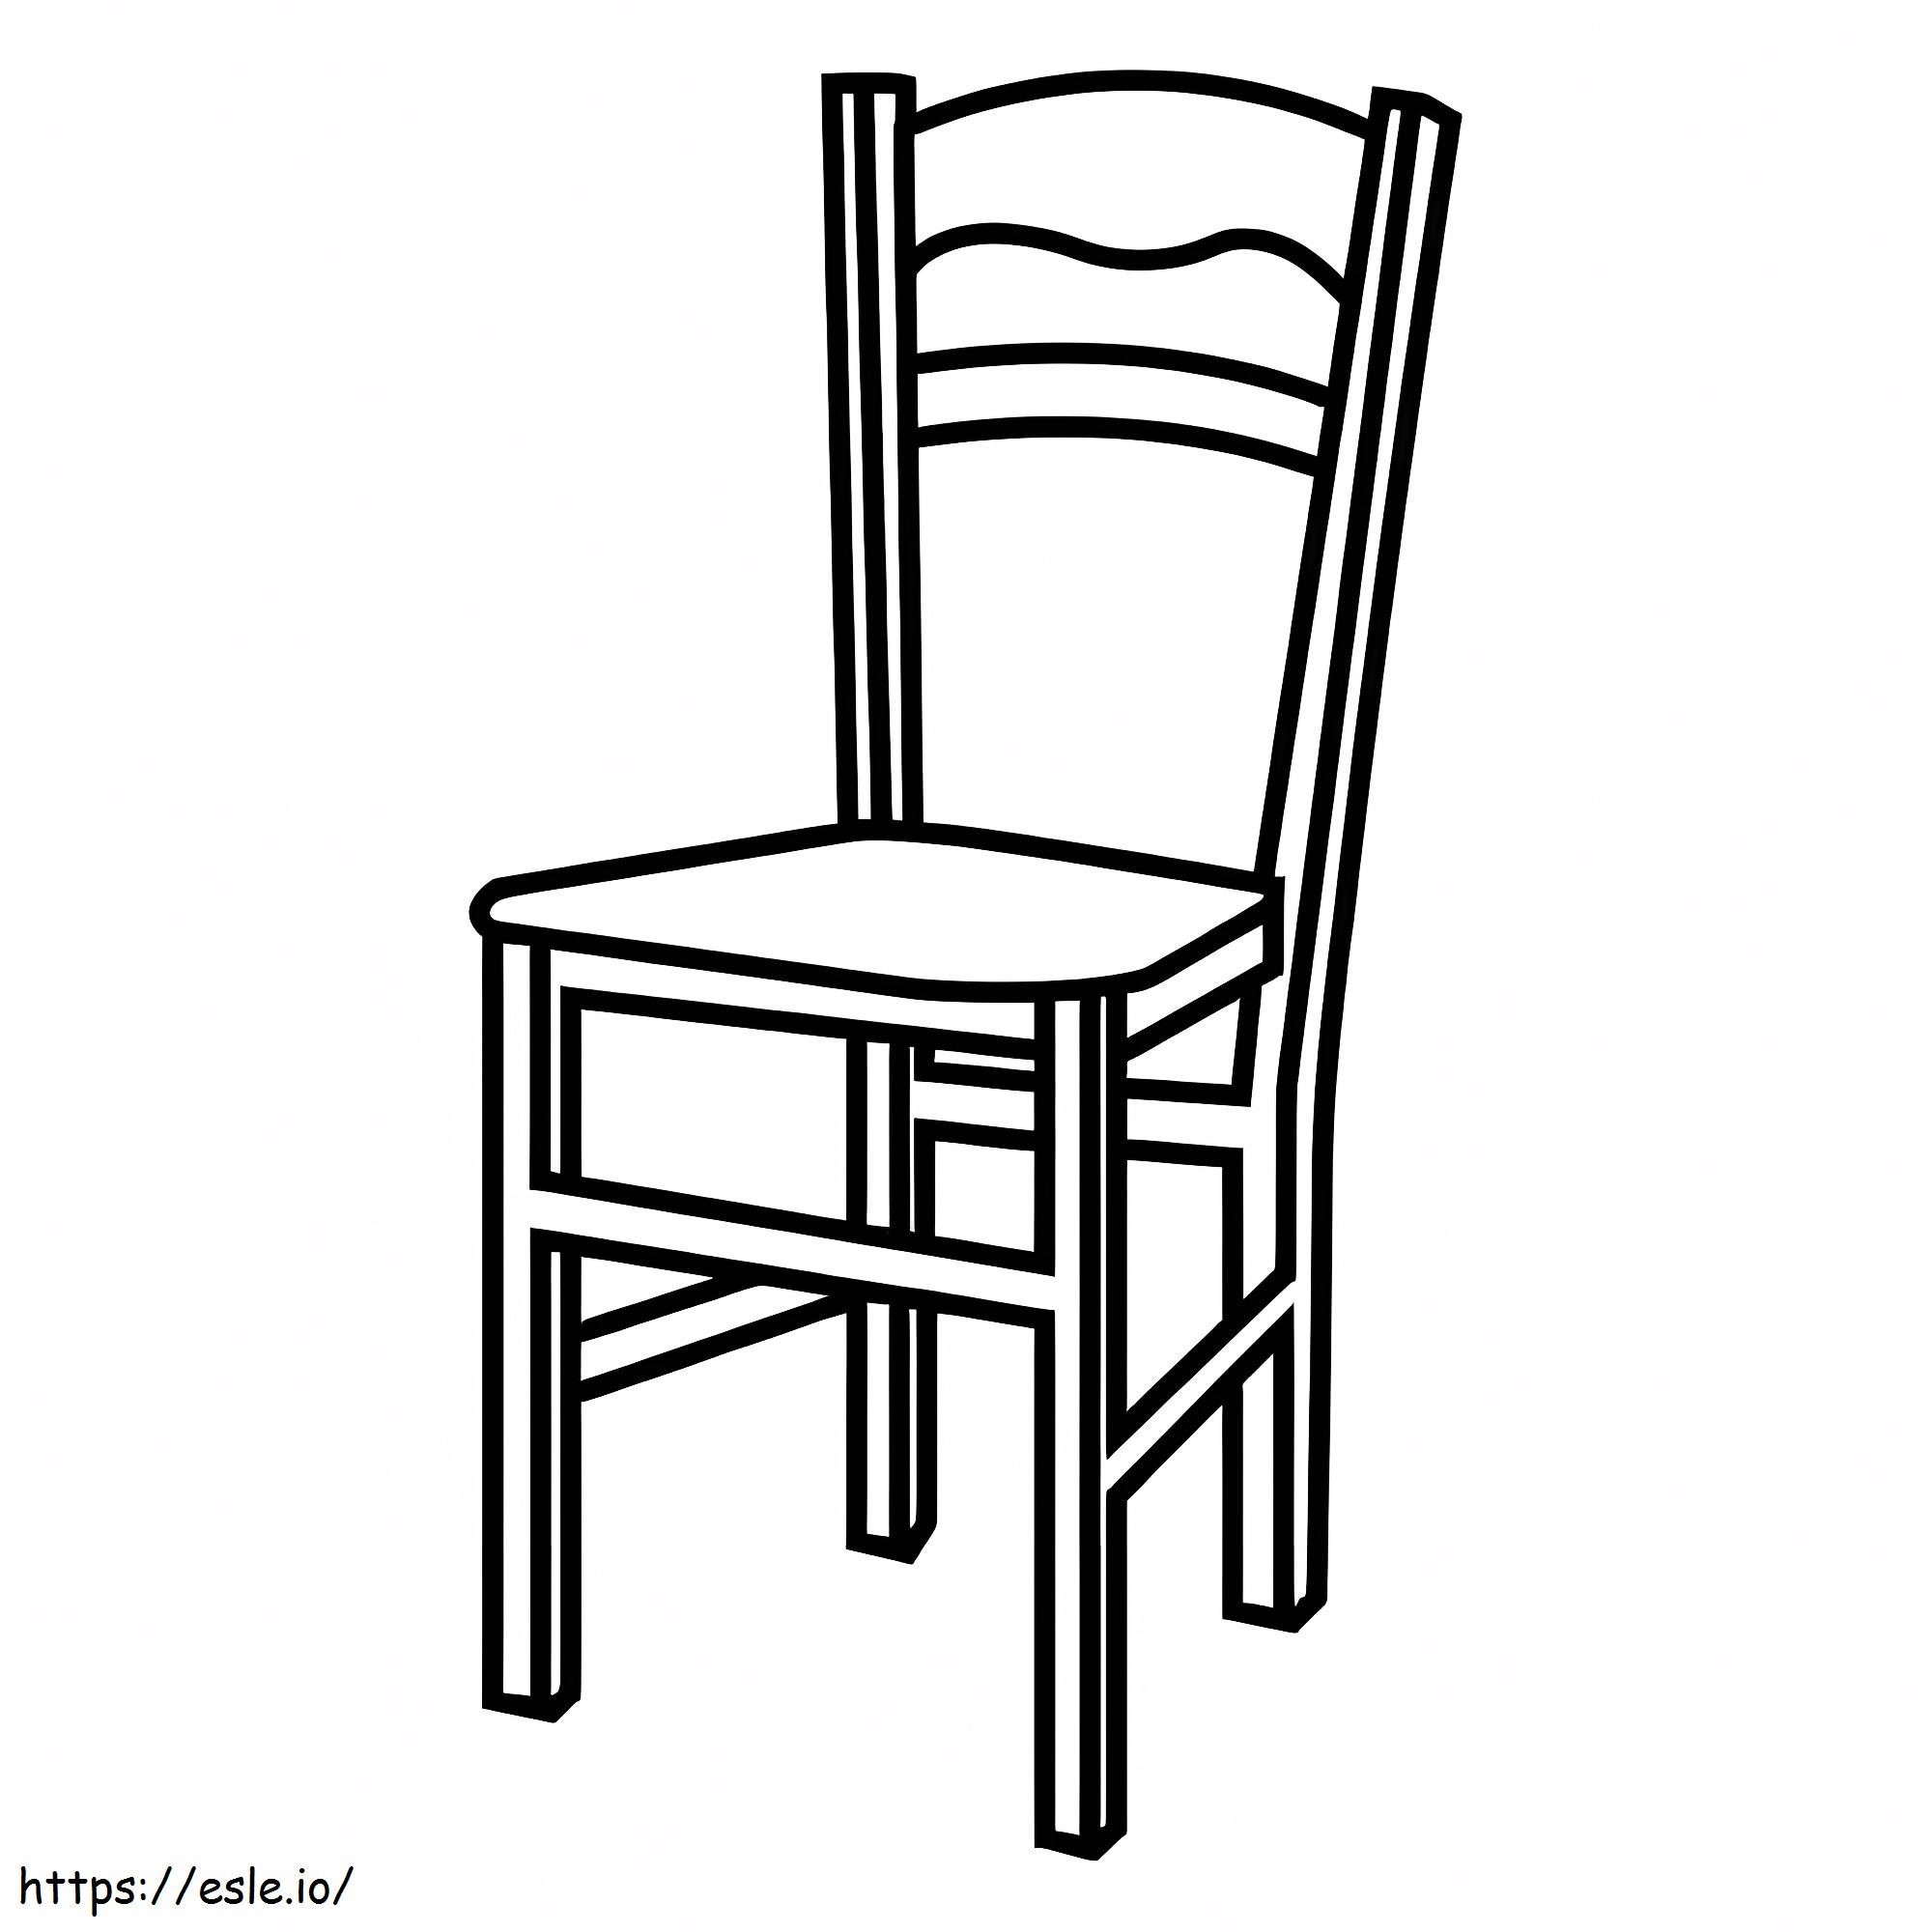 Printable Chair coloring page